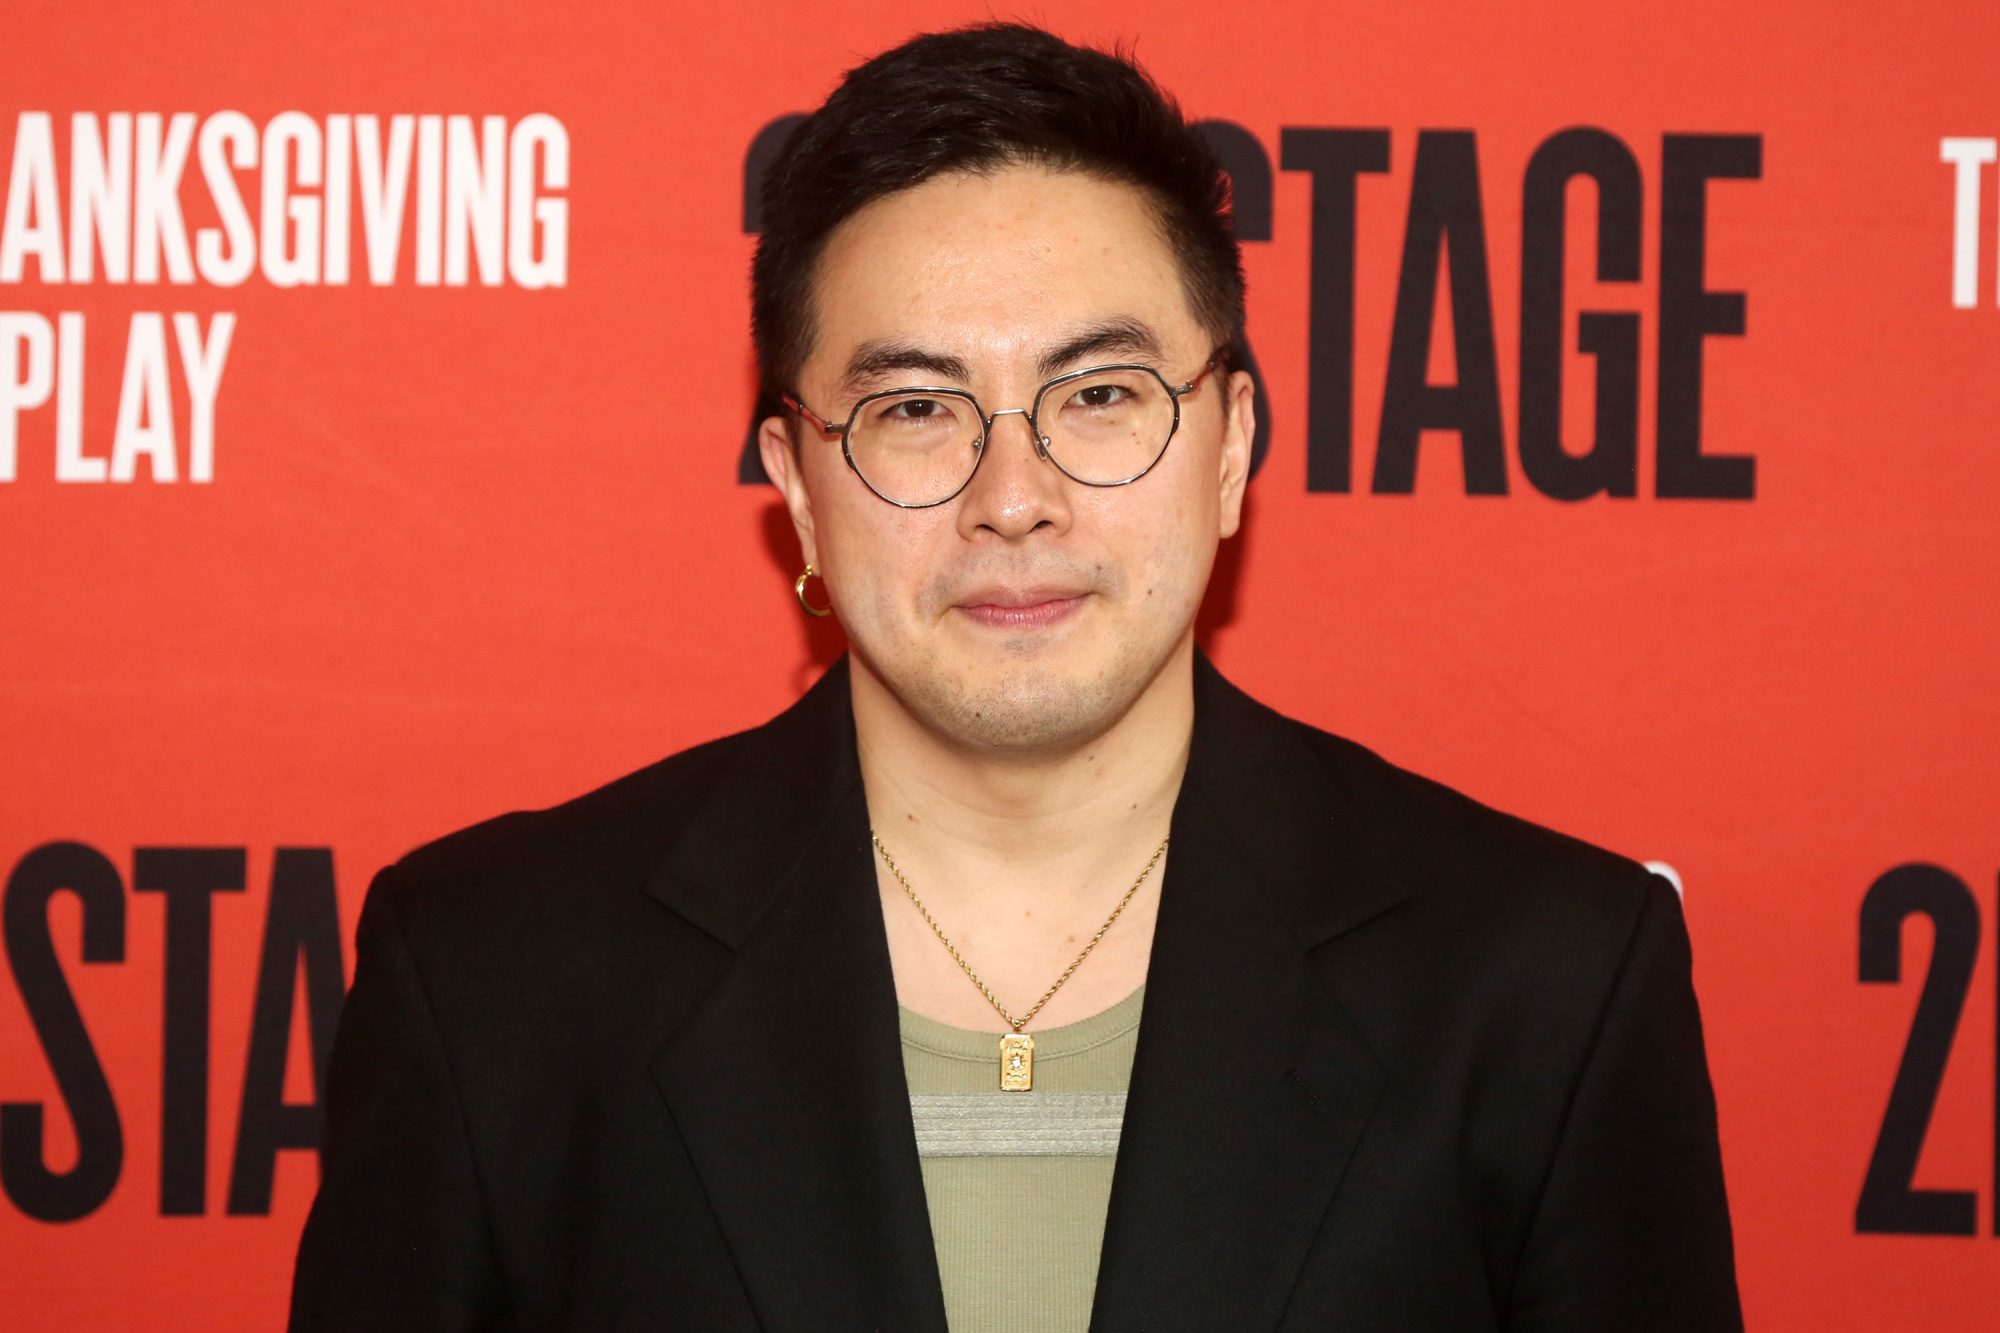 NEW YORK, NEW YORK - APRIL 20: Bowen Yang poses at the opening night of the Second Stage production of "The Thanksgiving Play" on Broadway at The Second Stage Helen Hayes Theatre on April 20, 2023 in New York City. (Photo by Bruce Glikas/Getty Images)